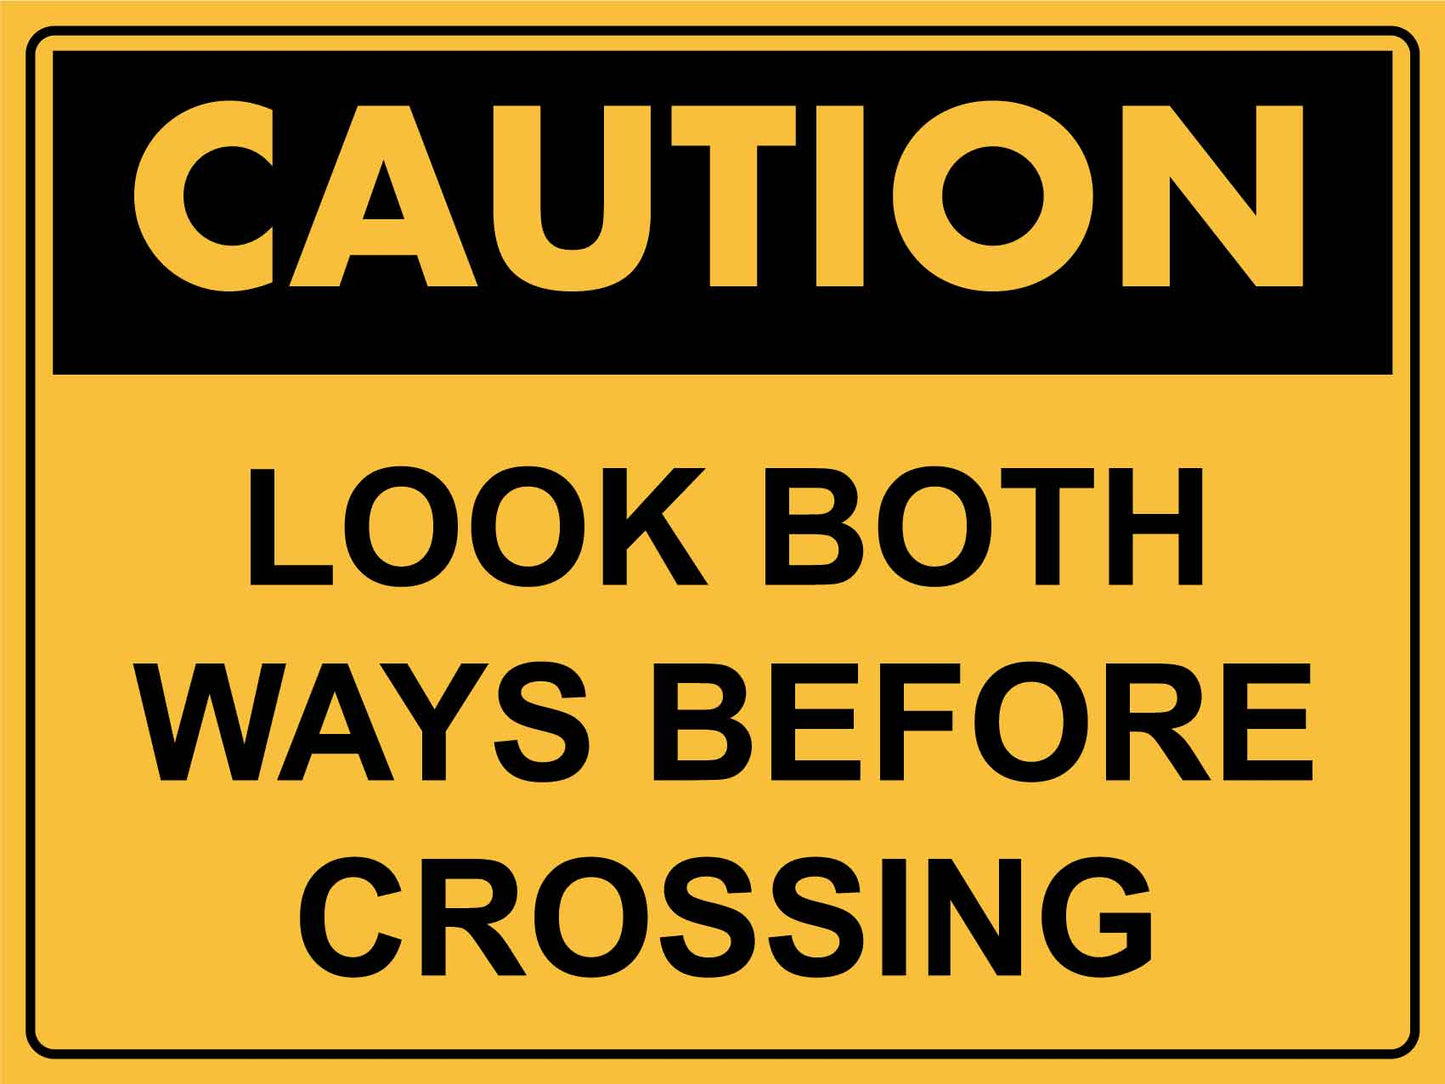 Caution Look Both Ways Before Crossing Sign